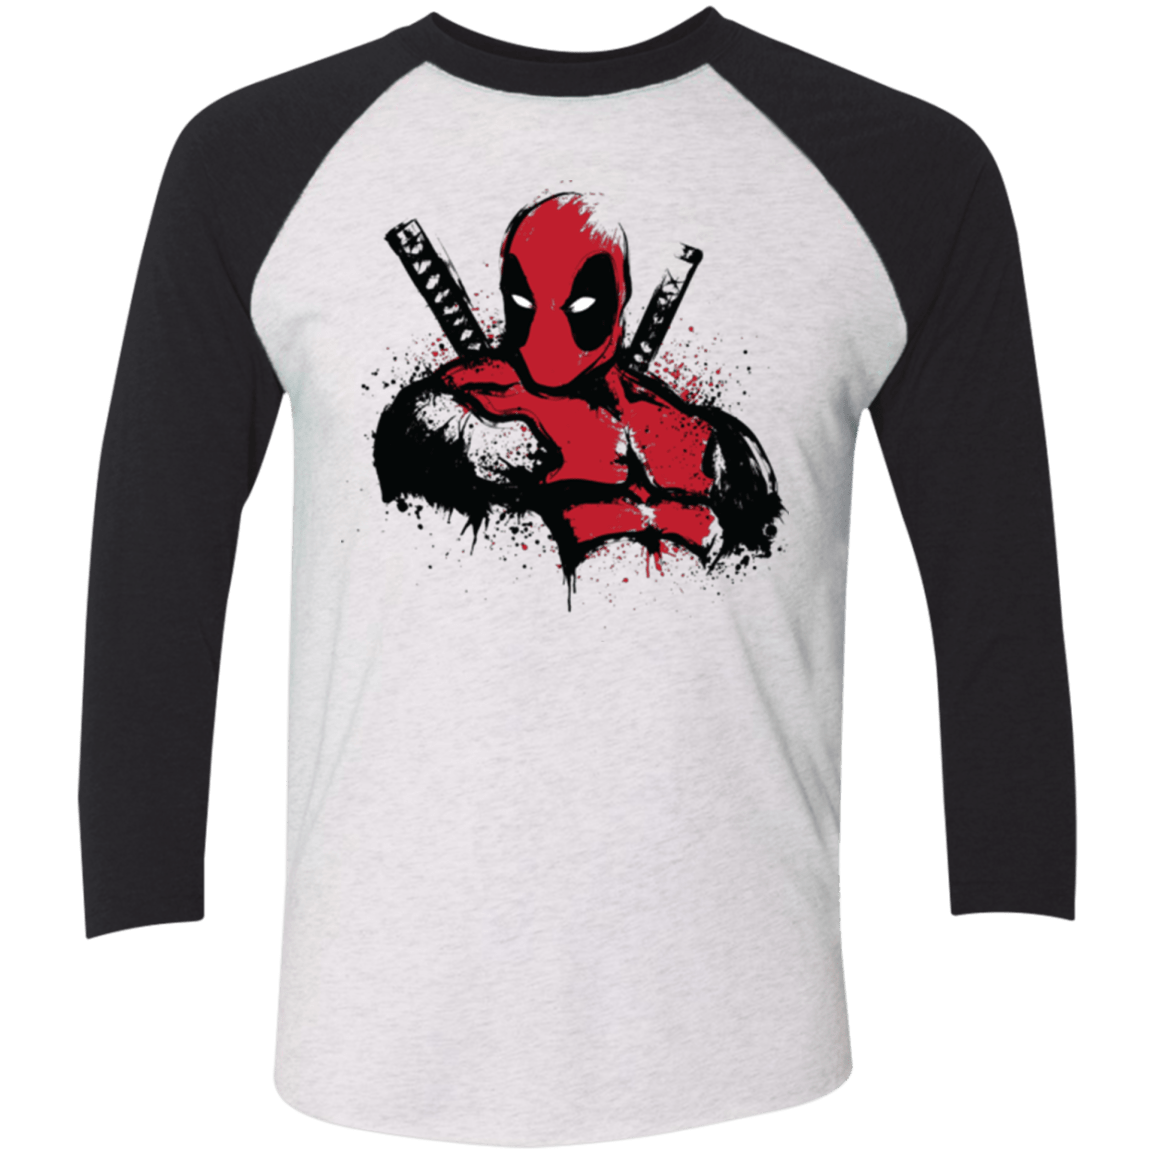 T-Shirts Heather White/Vintage Black / X-Small The Merc in Red Men's Triblend 3/4 Sleeve